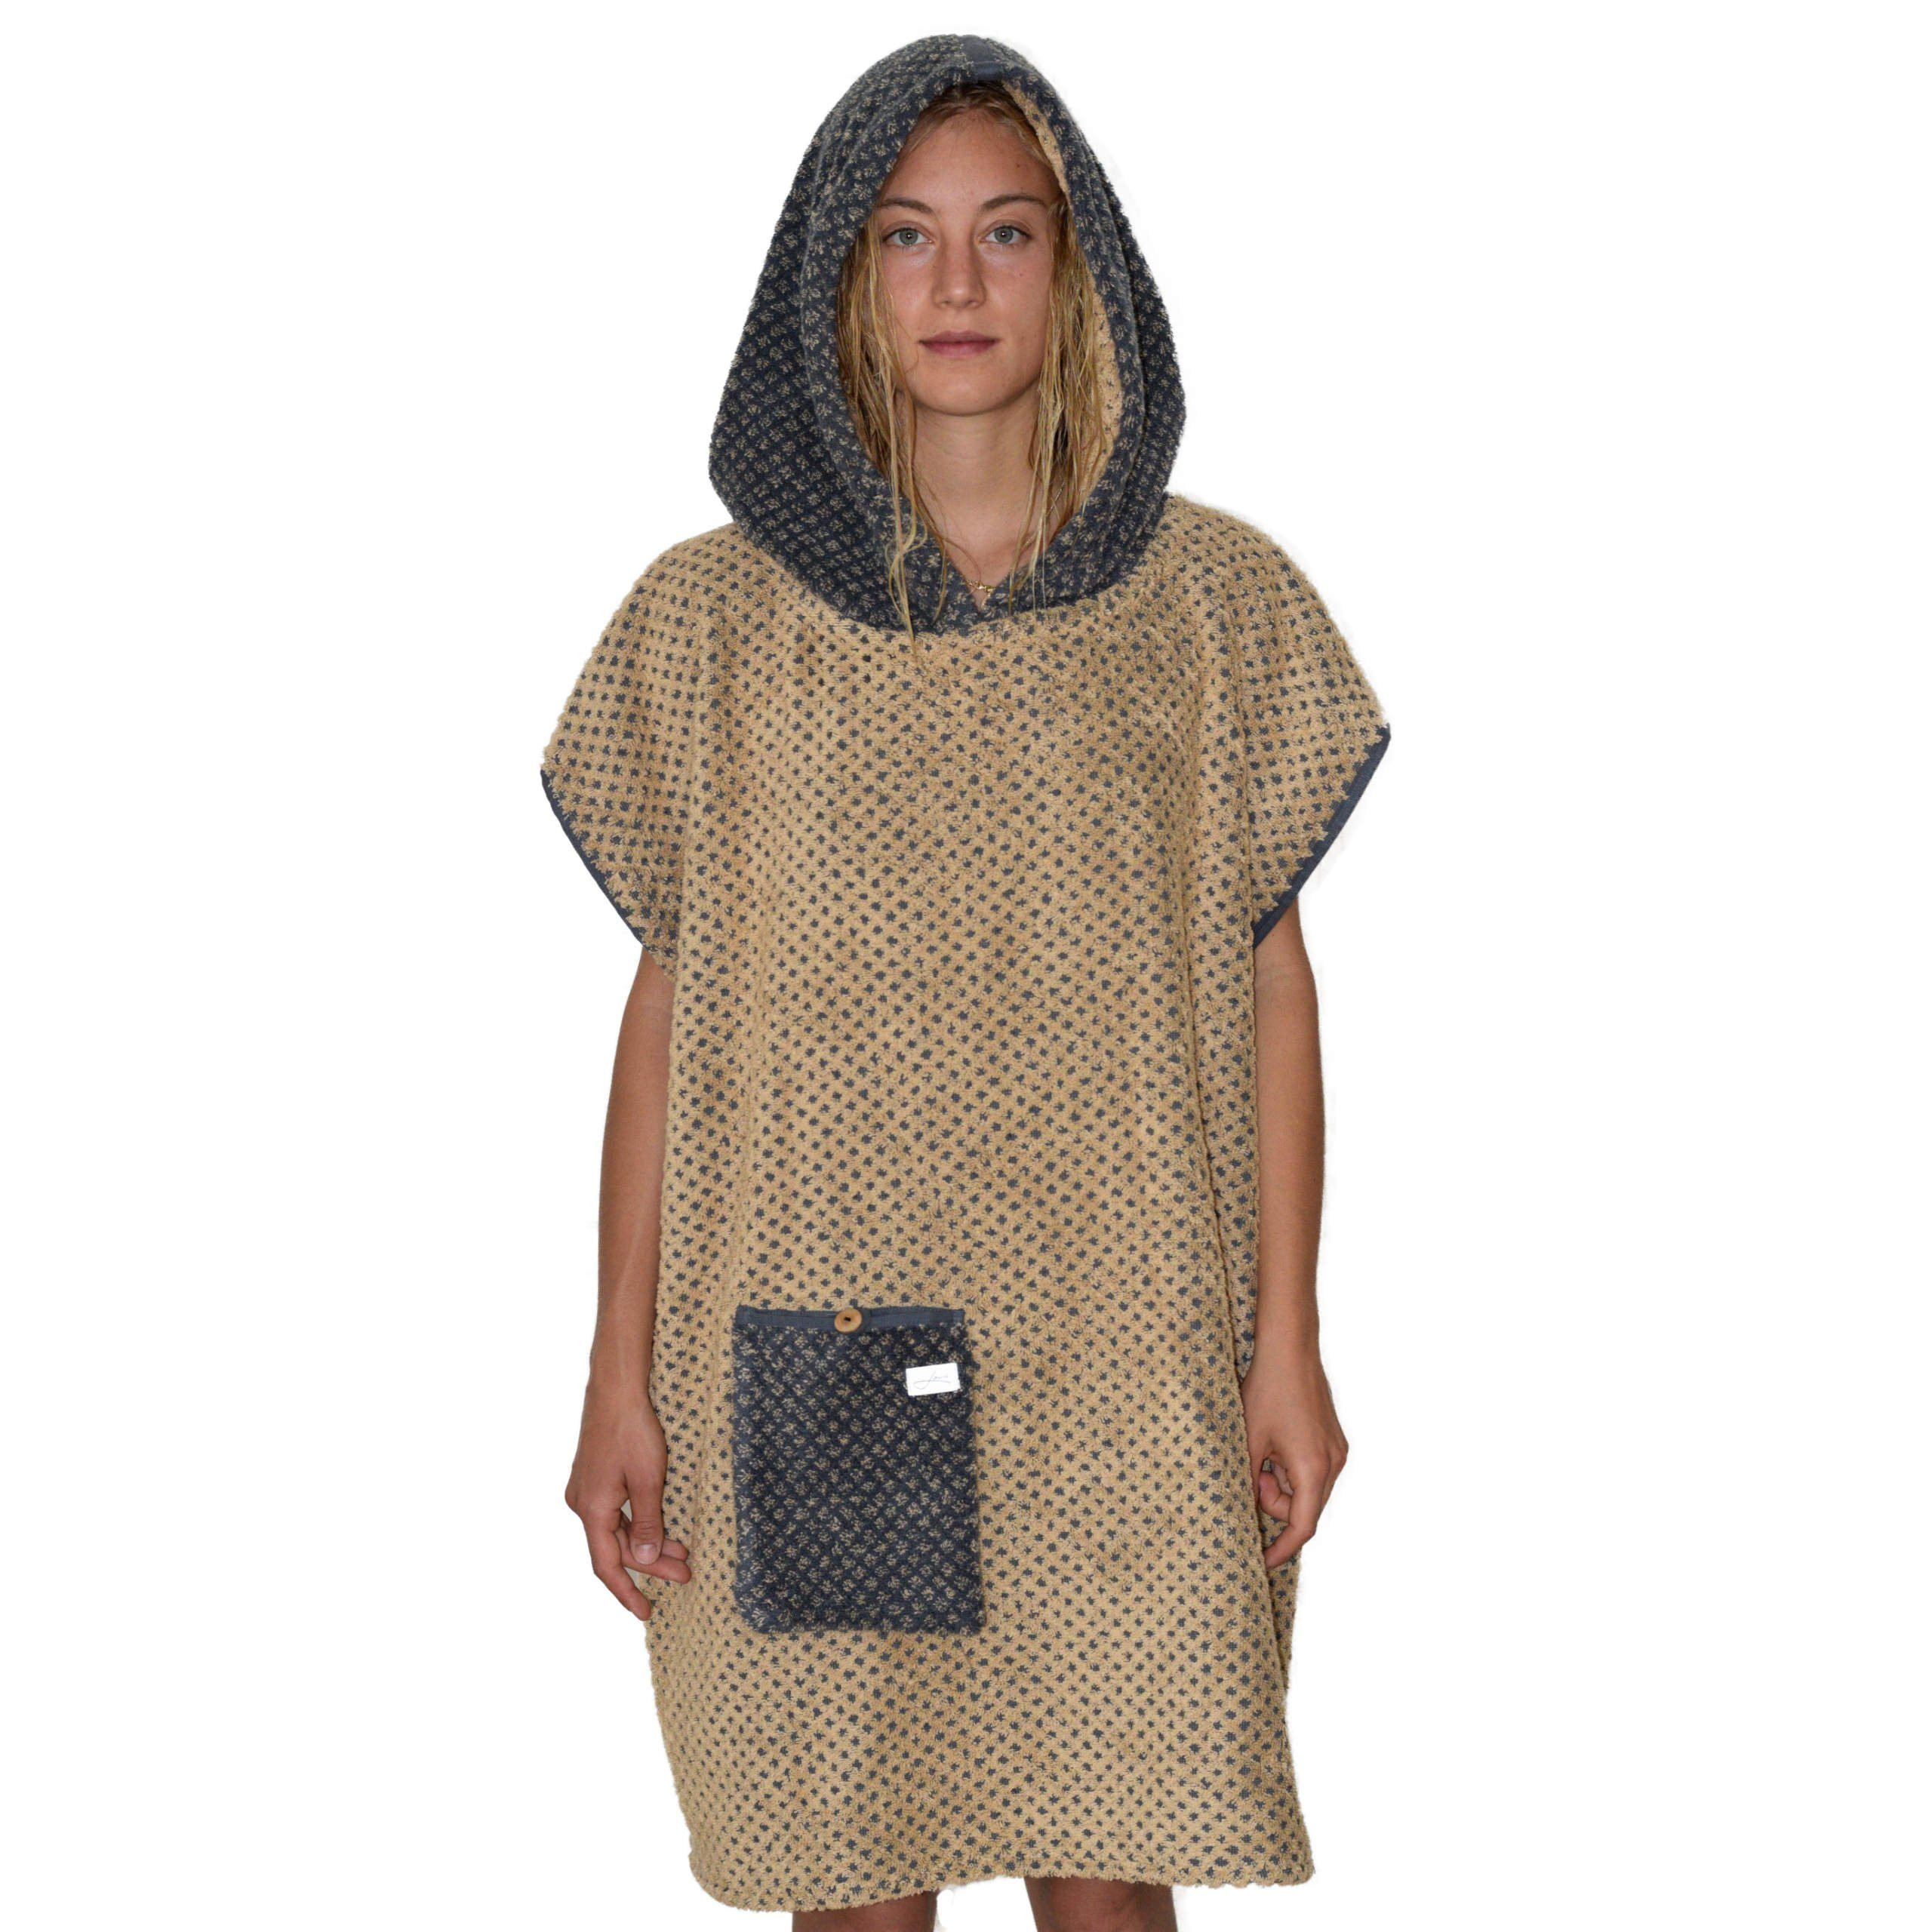 Lou-i Badeponcho Surfponcho Frottee Erwachsene Made in Germany Badeumhang,  Baumwolle, Kapuze, mit Kapuze und Tasche